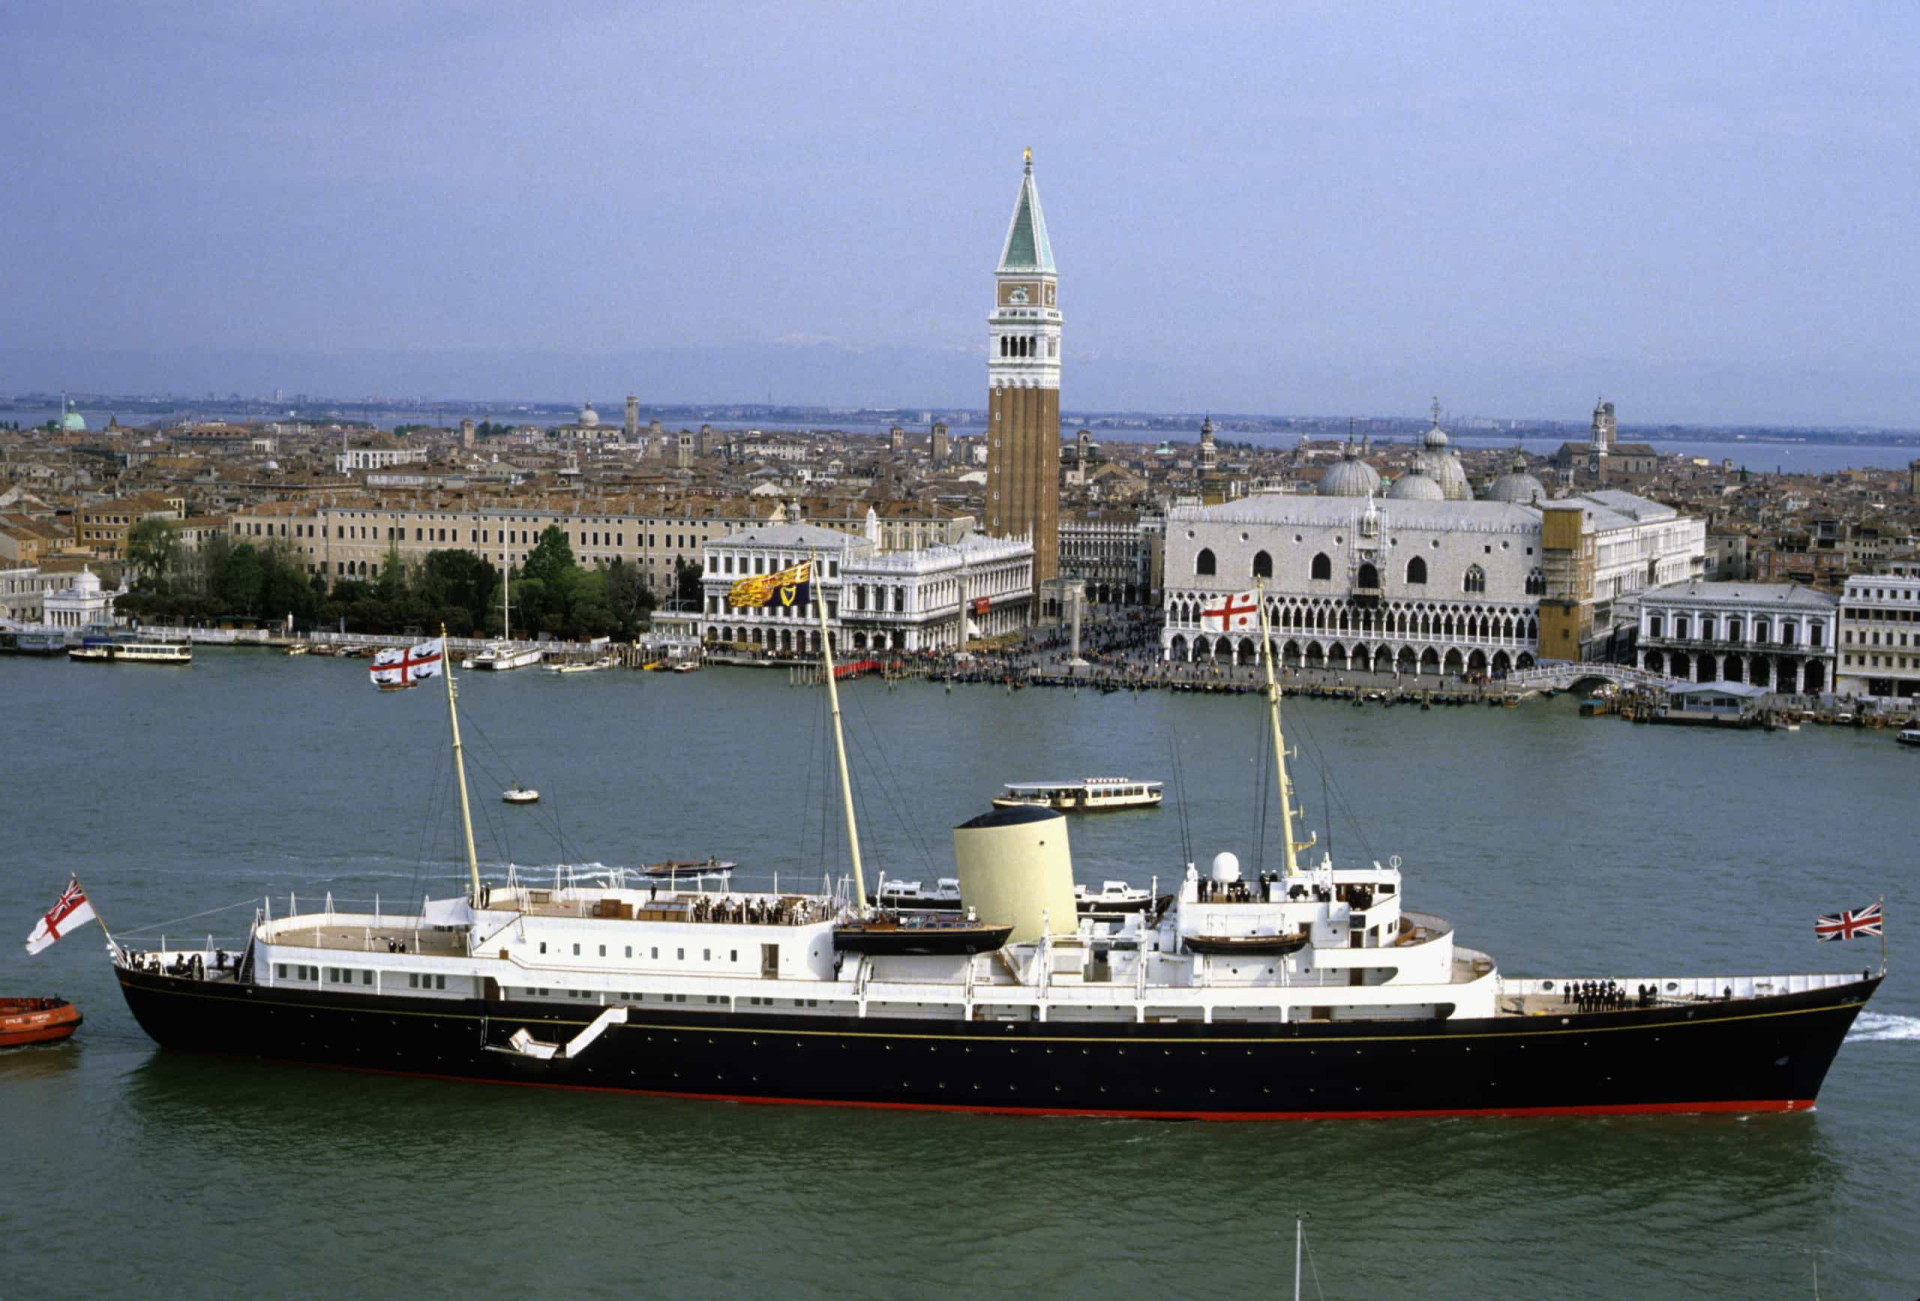 <p>Many Italians described the tour as a "second honeymoon" for the royal couple. Meanwhile, cities like Venice certainly provided a beautiful and historic backdrop for HMY <em>Britannia</em>.</p><p><a href="https://www.msn.com/en-ph/community/channel/vid-7xx8mnucu55yw63we9va2gwr7uihbxwc68fxqp25x6tg4ftibpra?cvid=94631541bc0f4f89bfd59158d696ad7e">Follow us and access great exclusive content every day</a></p>